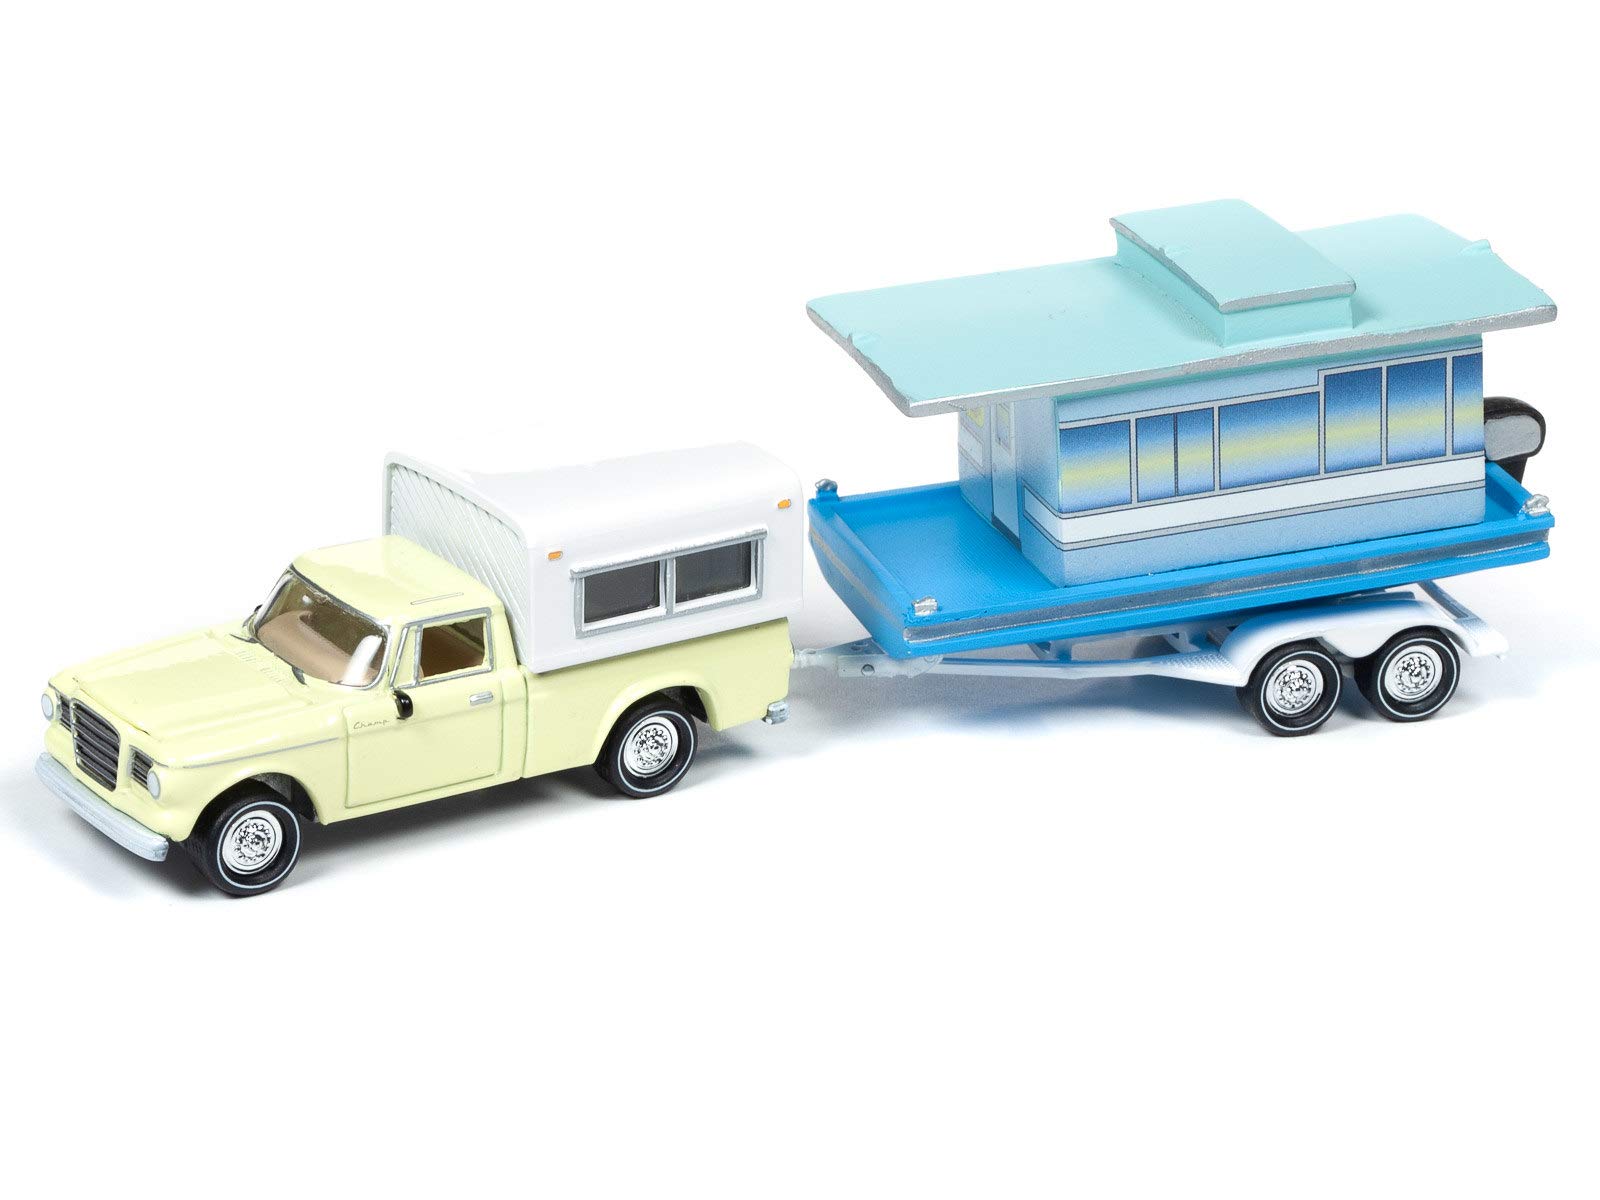 1960 Studebaker Pickup Truck w/Camper Shell Jonquil Yellow w/Houseboat Limited Edition to 4,504 Pieces Worldwide Hulls & Haulers Series 2 1/64 Diecast Model by Johnny Lightning JLBT012B-JLSP070